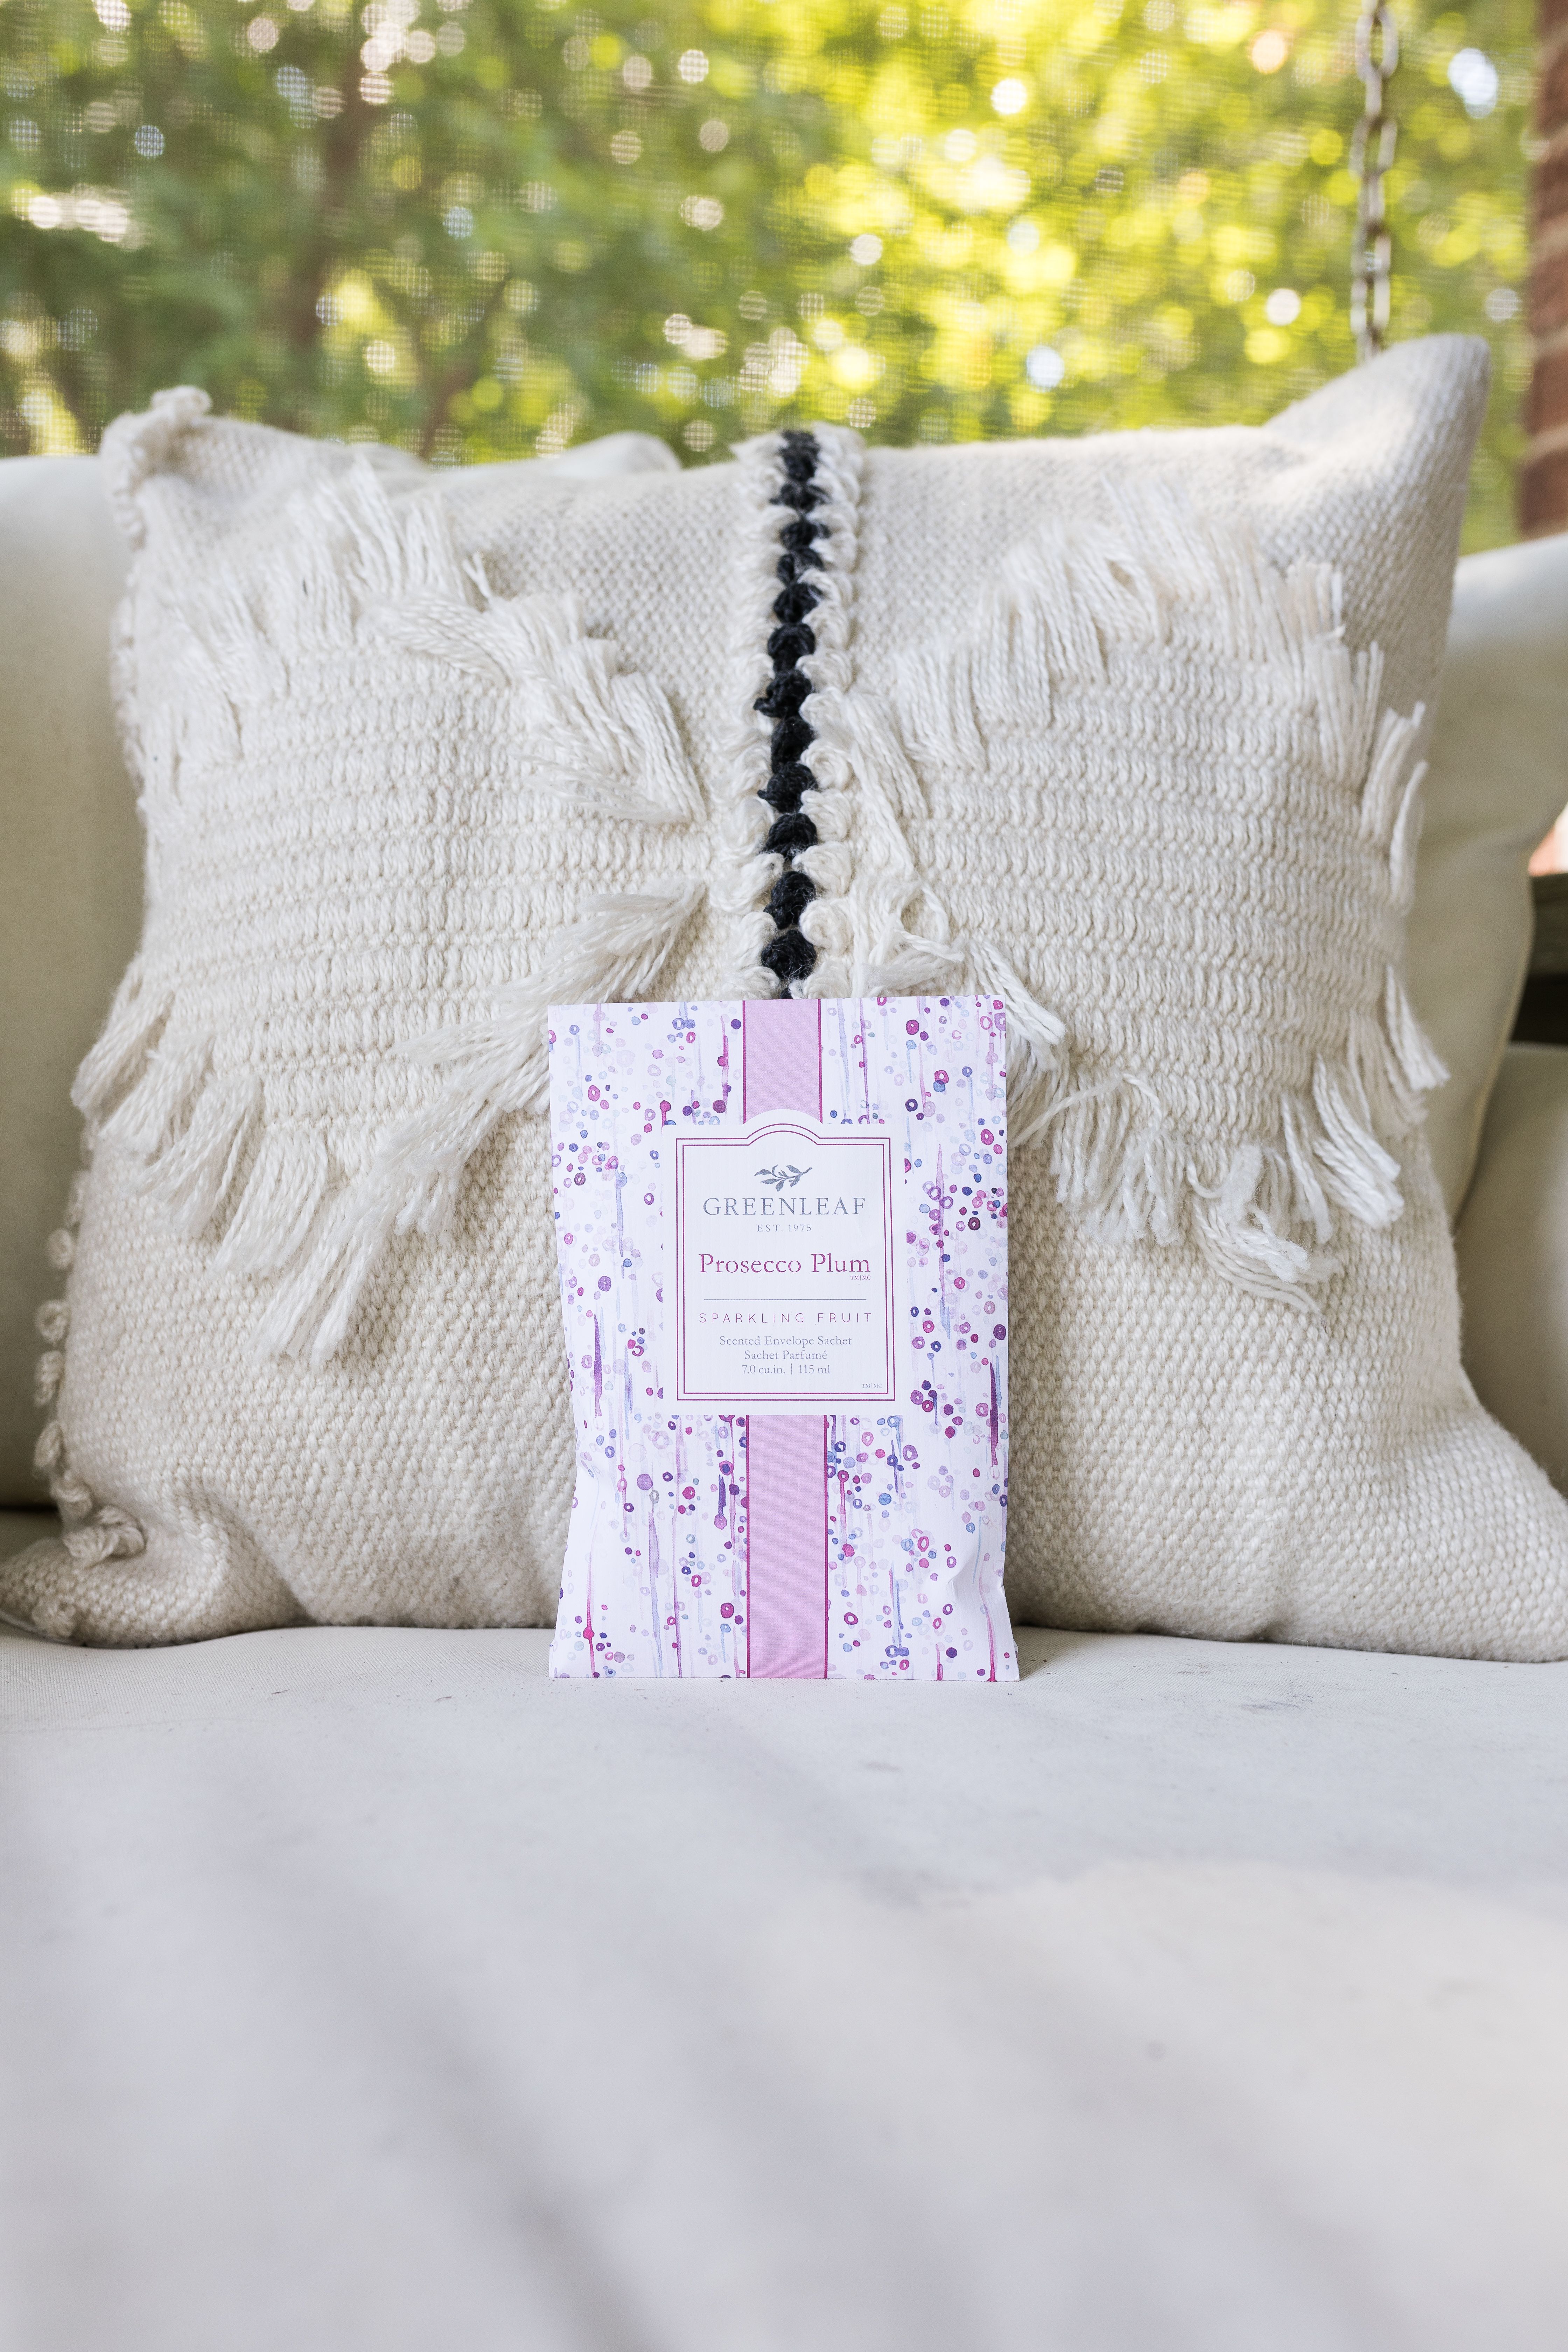 Prosecco Plum scented sachet by Greenleaf